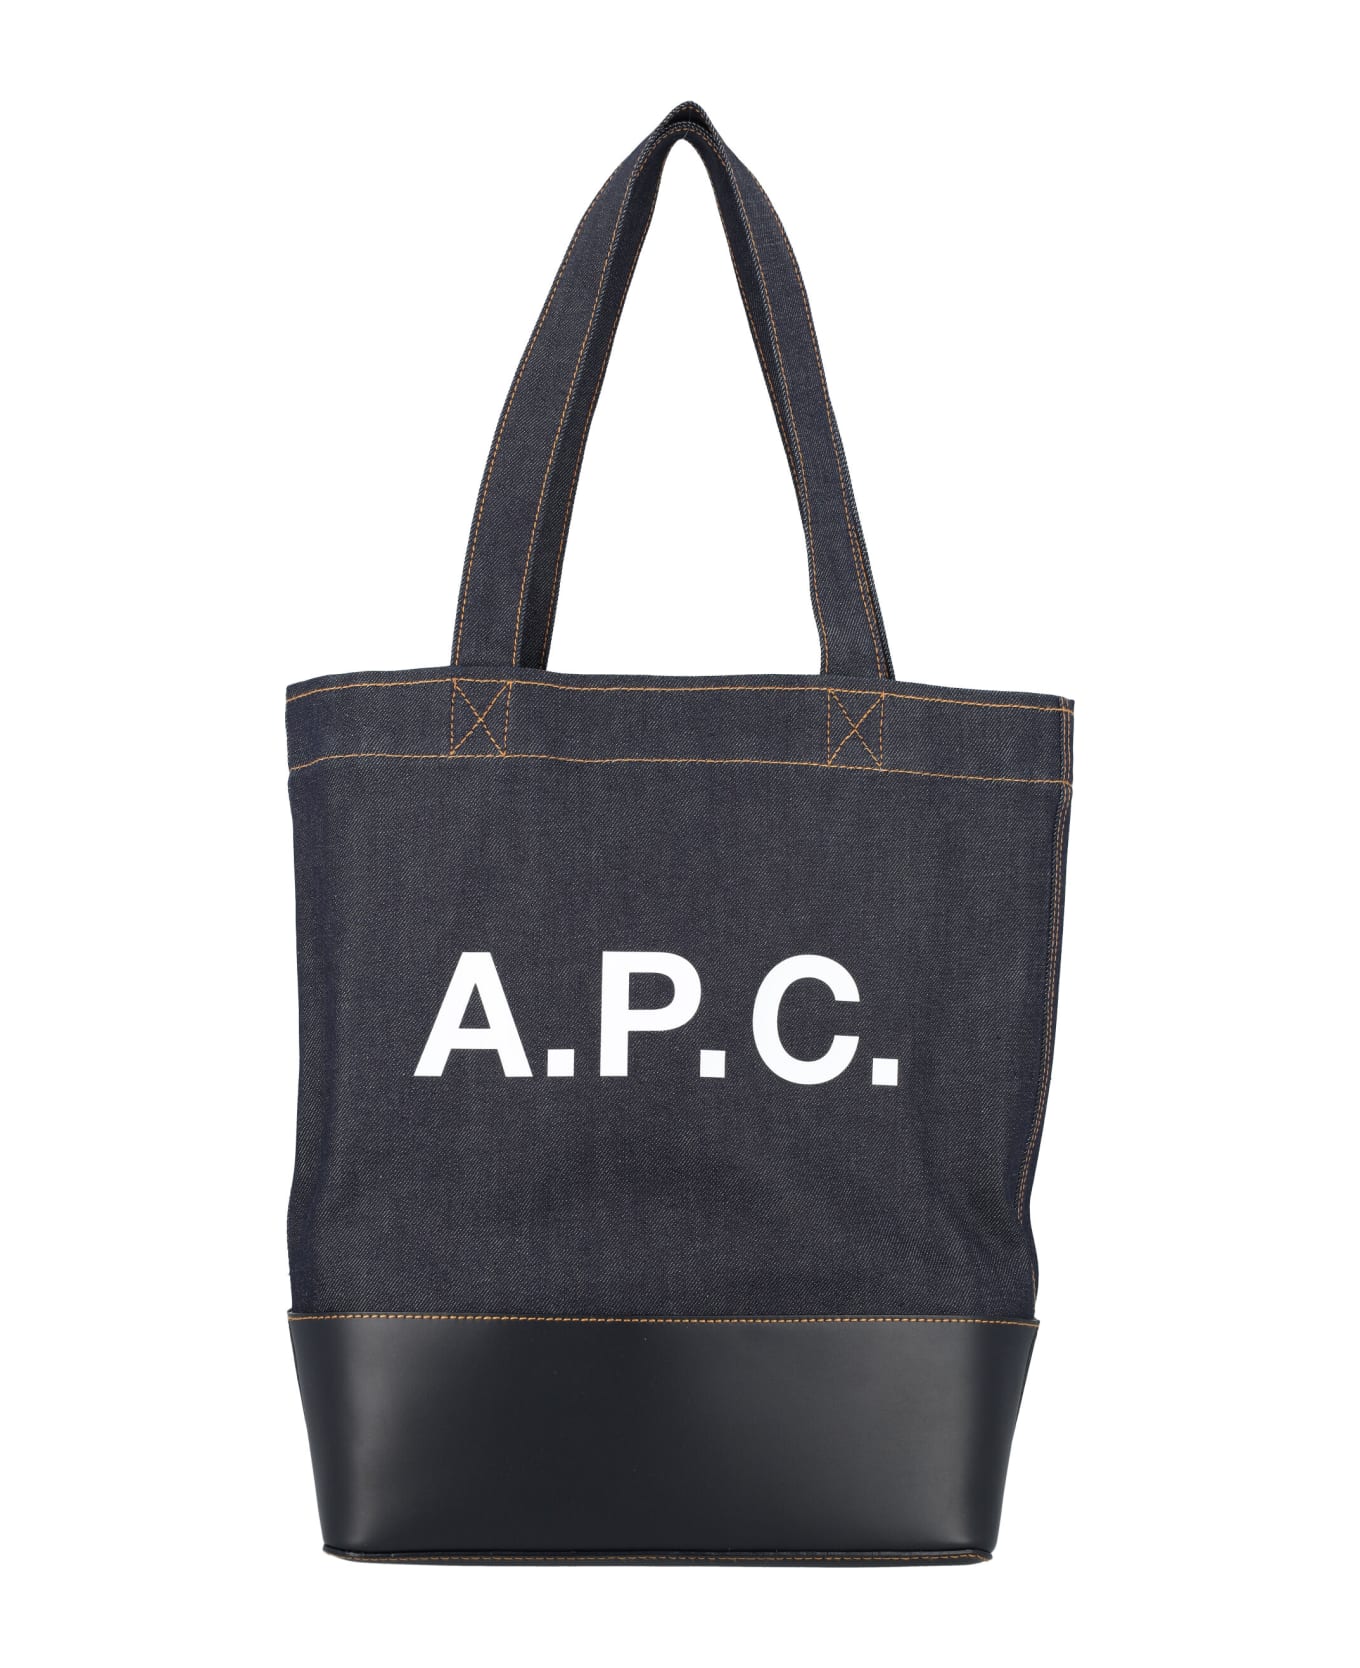 A.P.C. Axel Denim Tote - NAVY トートバッグ